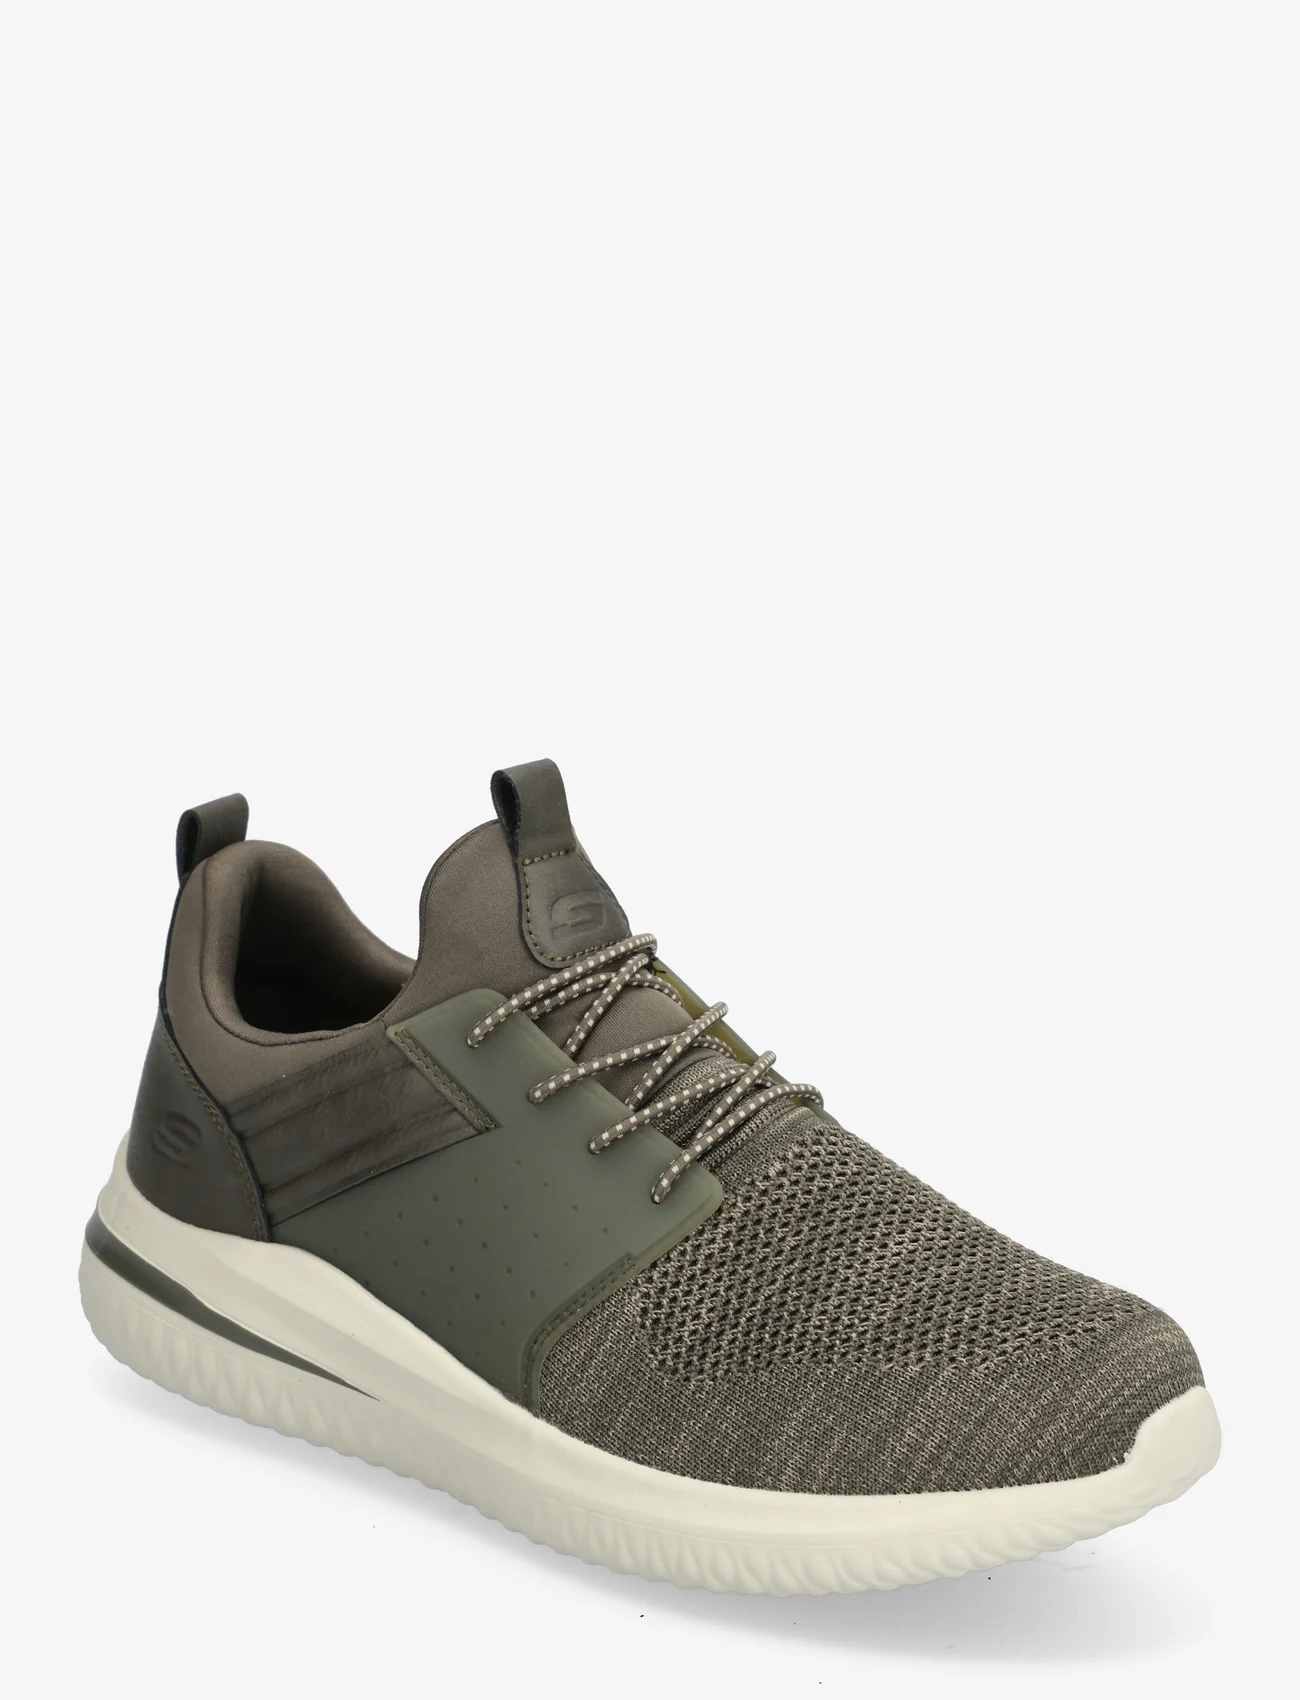 Skechers - Mens Delson 3.0 - Cicada - lave sneakers - olv olive - 0